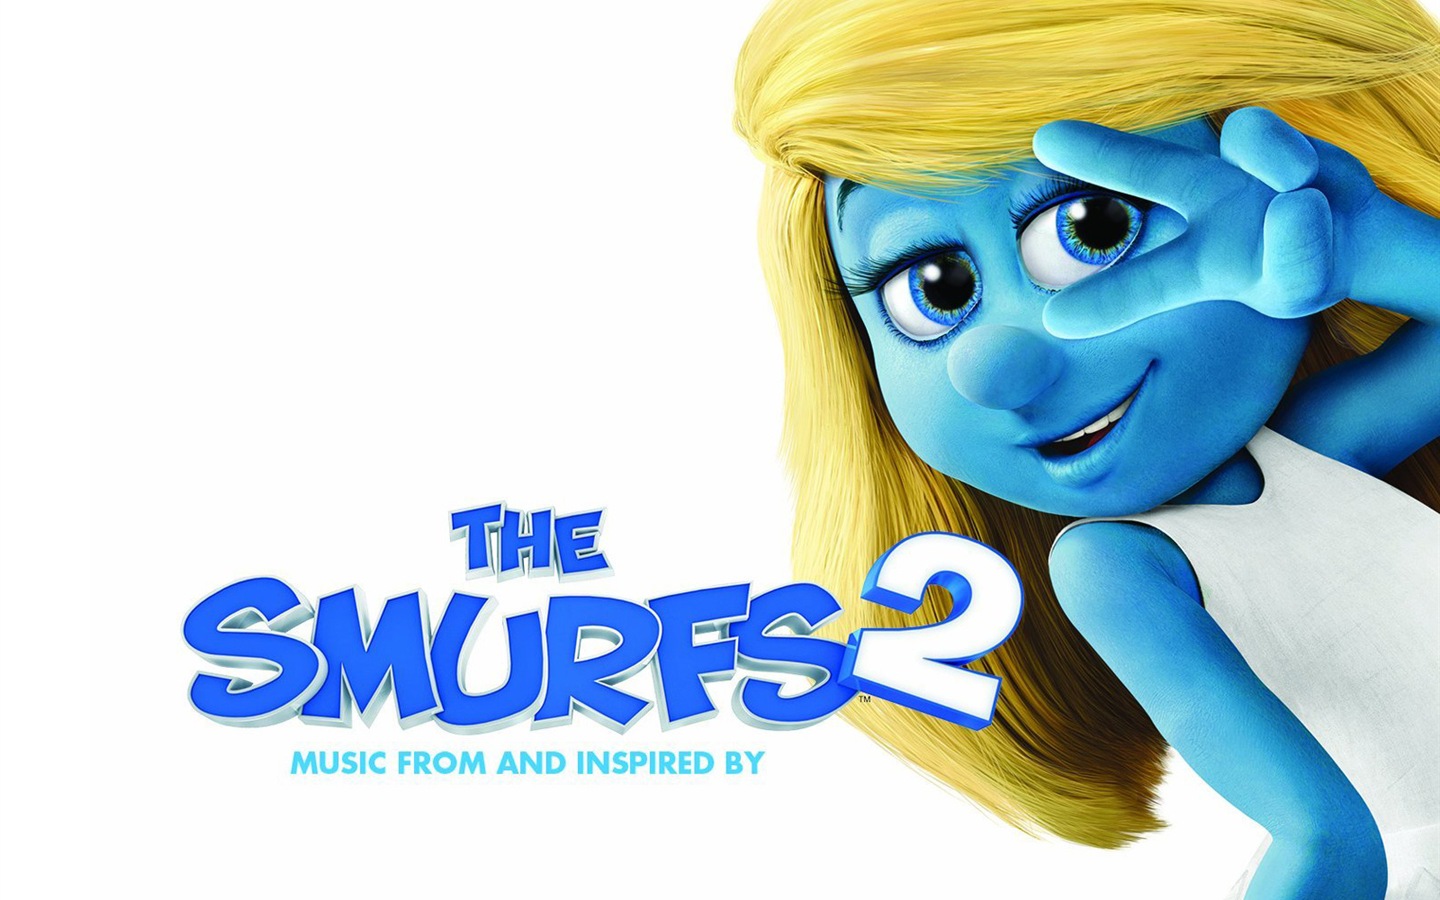 The Smurfs 2 HD movie wallpapers #4 - 1440x900